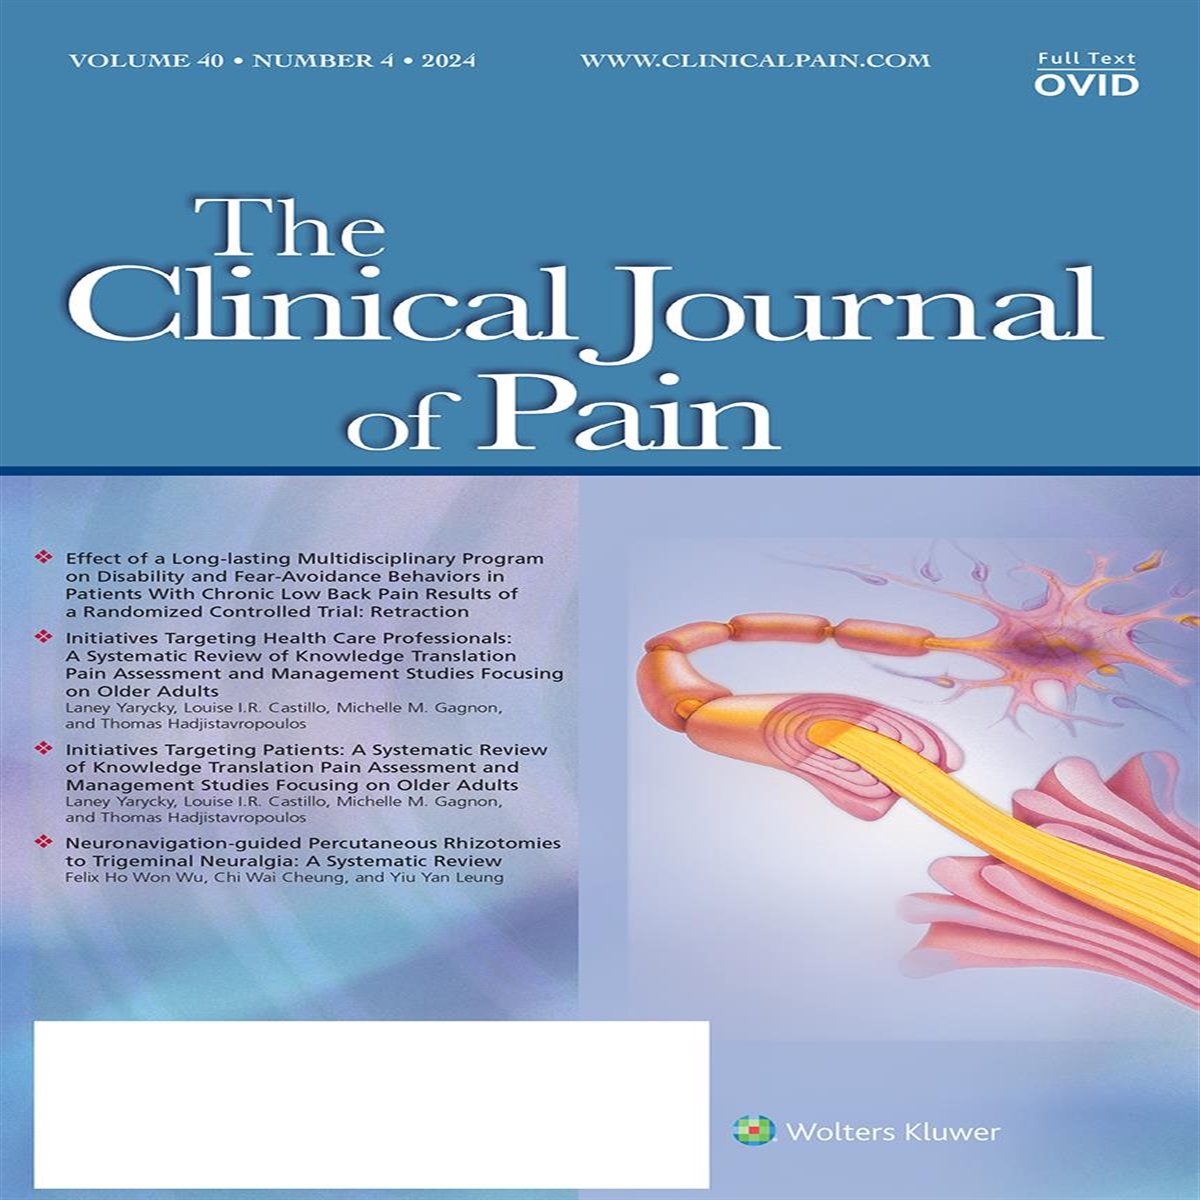 Effect of a Long-lasting Multidisciplinary Program on Disability and Fear-Avoidance Behaviors in Patients With Chronic Low Back Pain Results of a Randomized Controlled Trial: Retraction